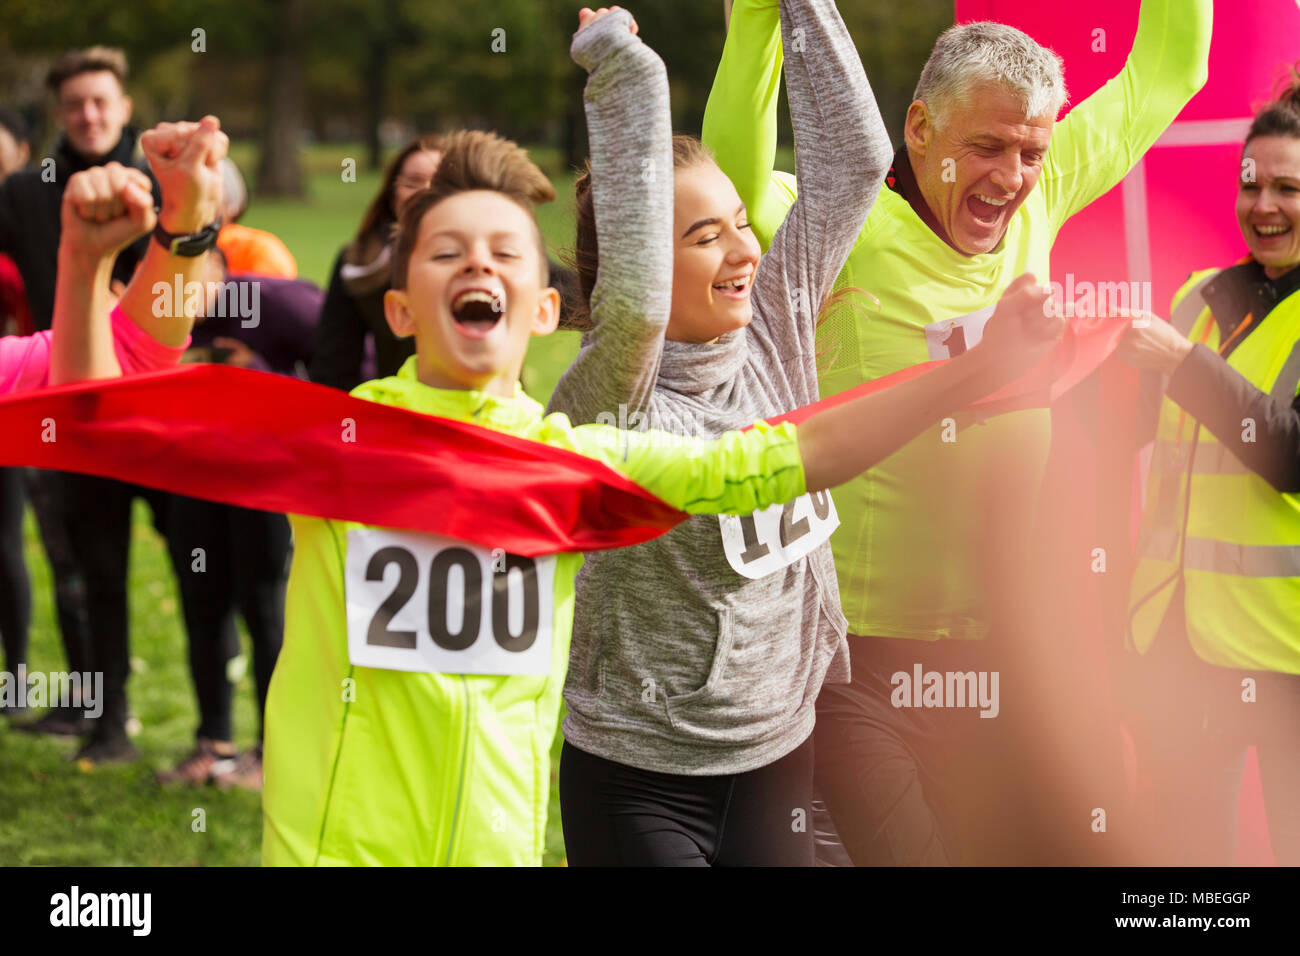 Enthusiastic boy runner crossing charity run finish line with family Stock Photo